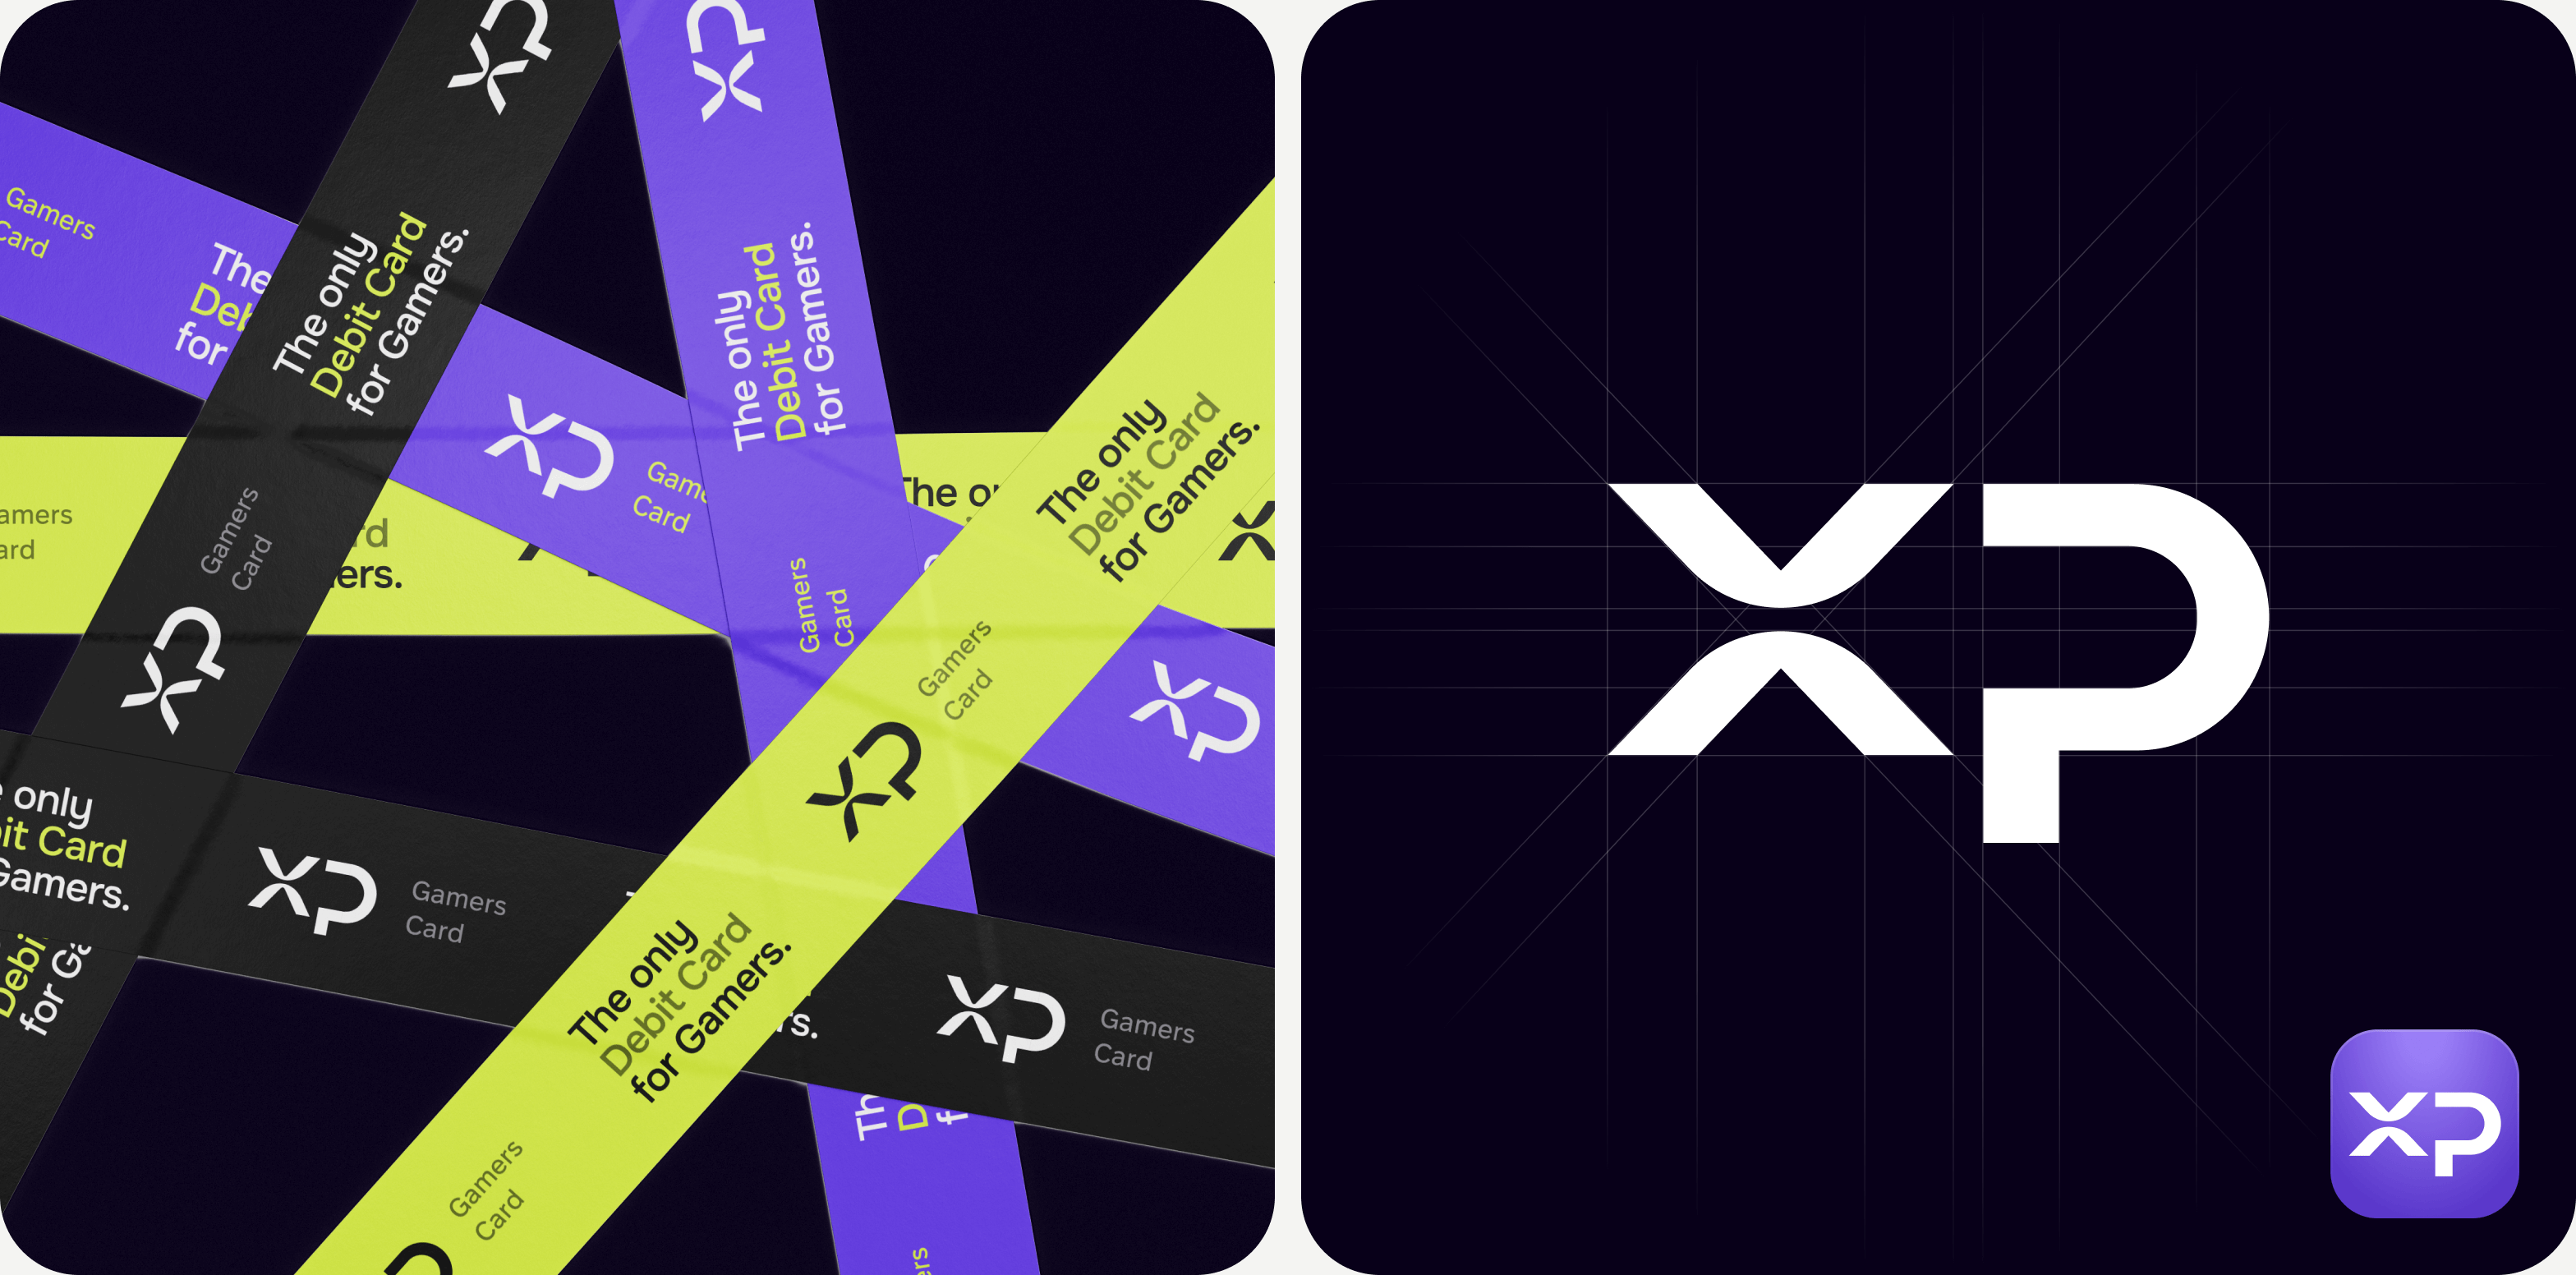 Goodface agency, case XP, logo & brand identity.png - XP games card project: Logo & brand identity design, UX/UI design and website development for a fintech startup in the esports industry – Goodface agency  - goodface.agency